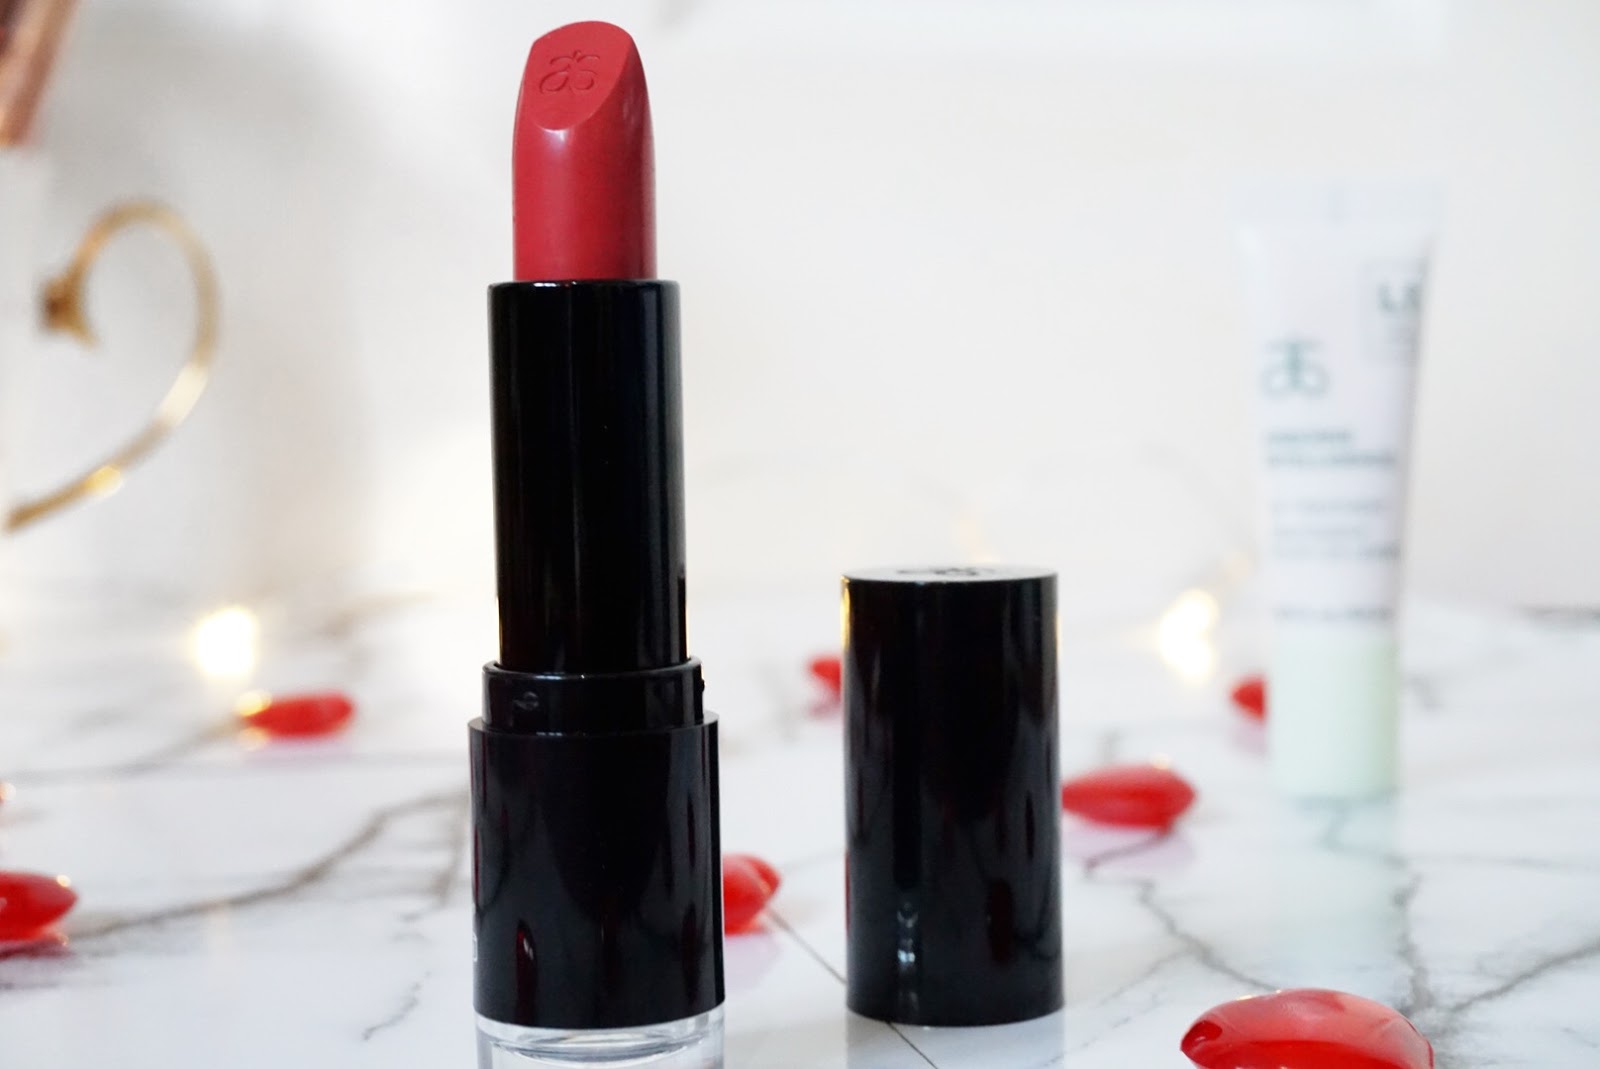 Arbonne Smoother Over Lipstick in Hibiscus